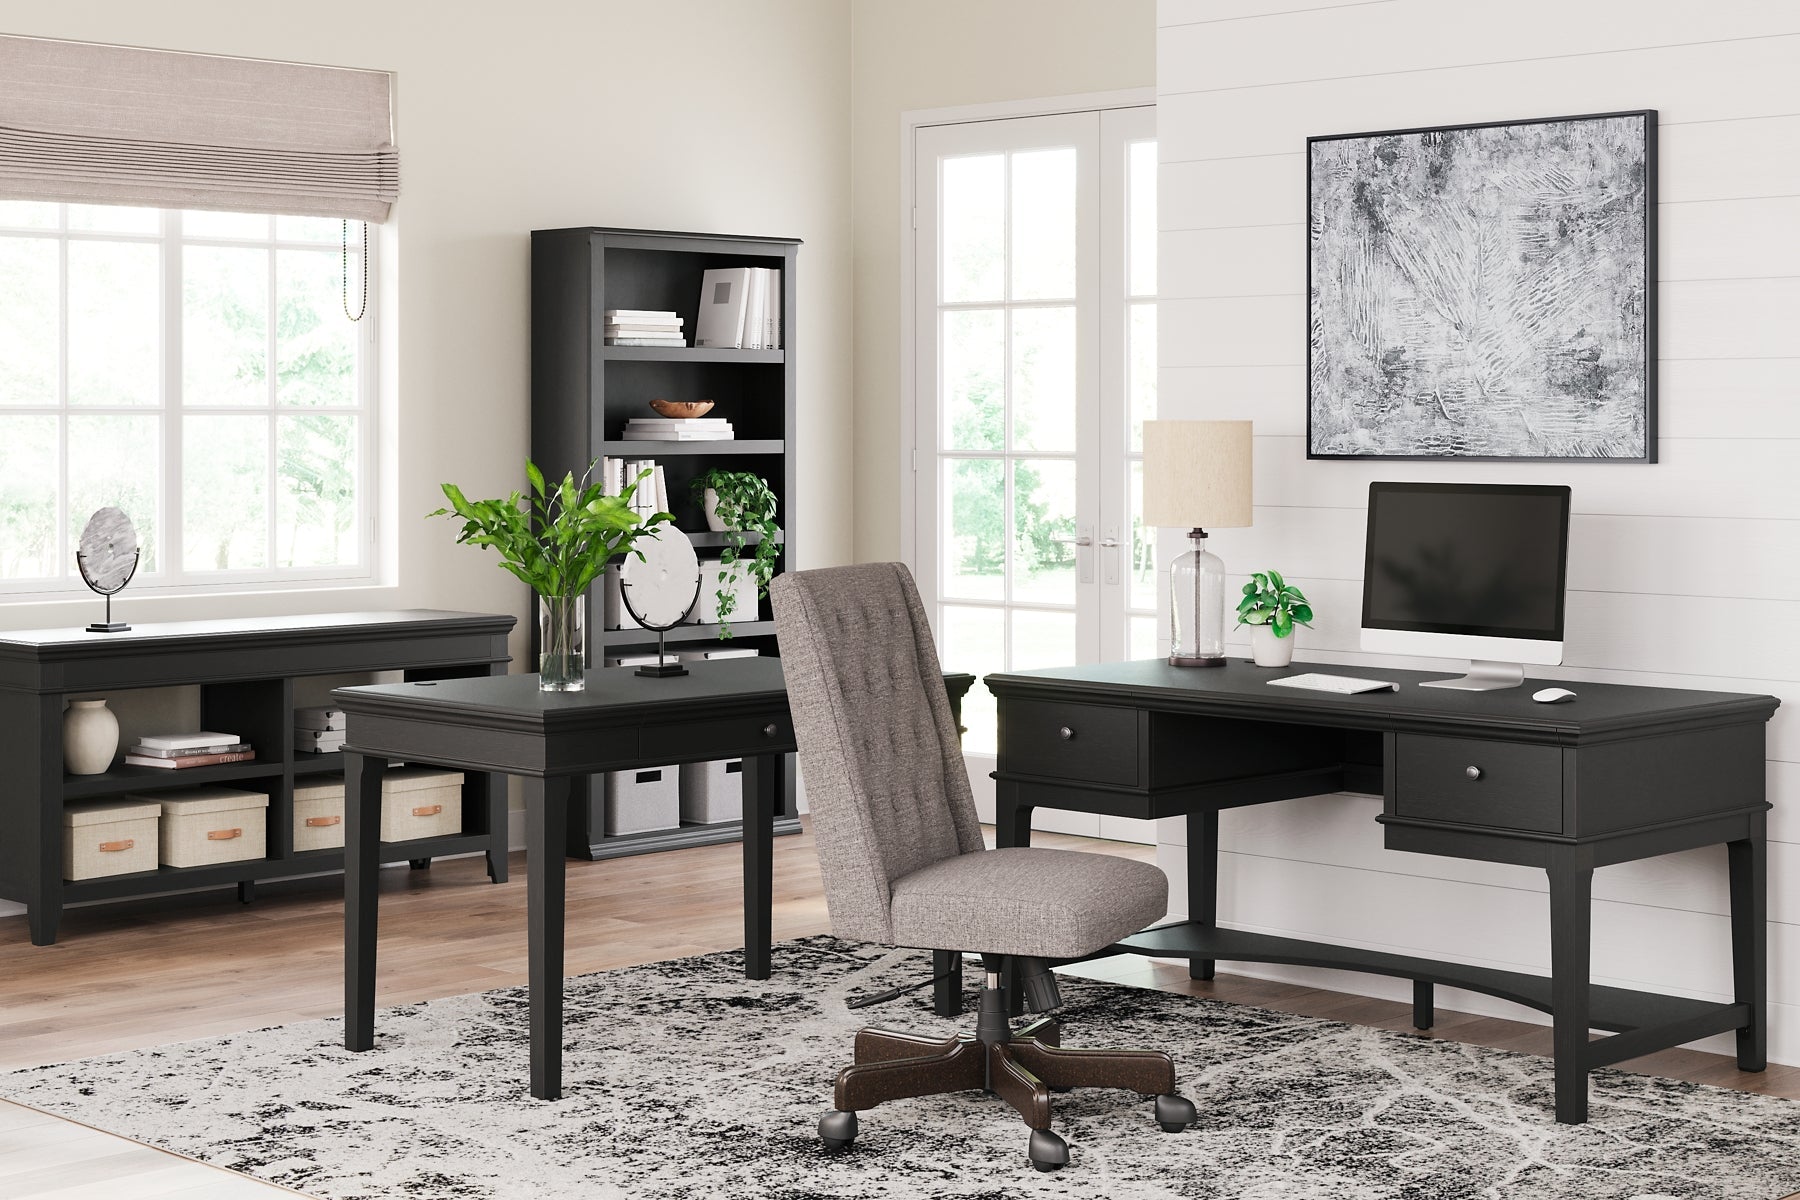 Beckincreek Home Office Small Leg Desk Rent Wise Rent To Own Jacksonville, Florida